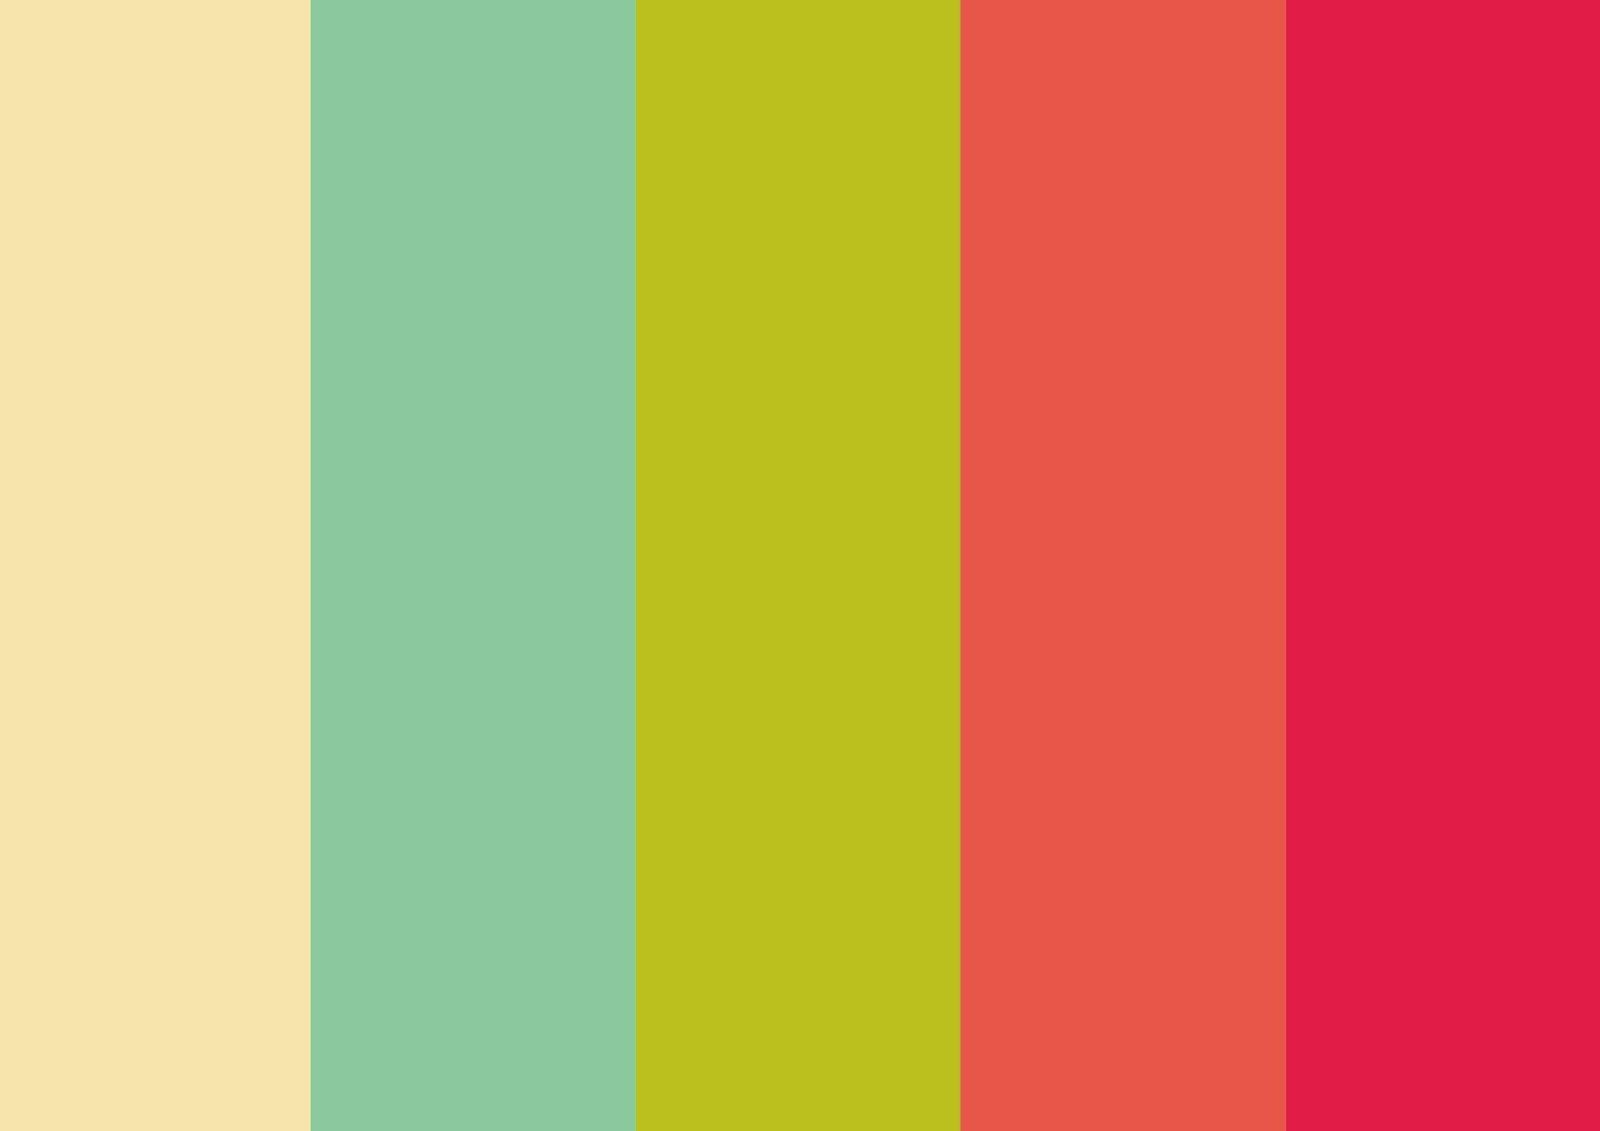 Background Kosong 4 - 70's Hippie Color Palette , HD Wallpaper & Backgrounds